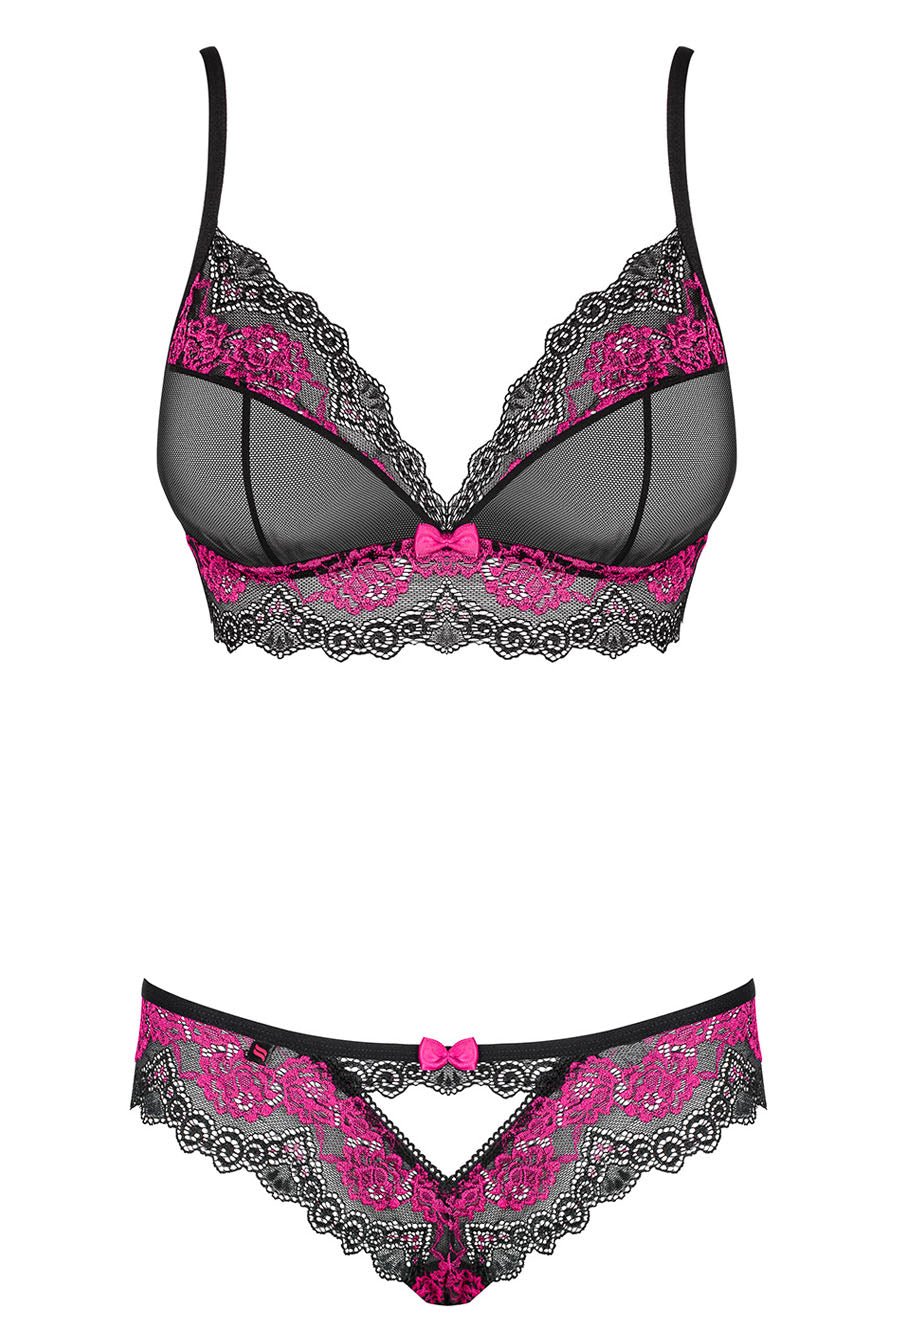 pink and black lingerie